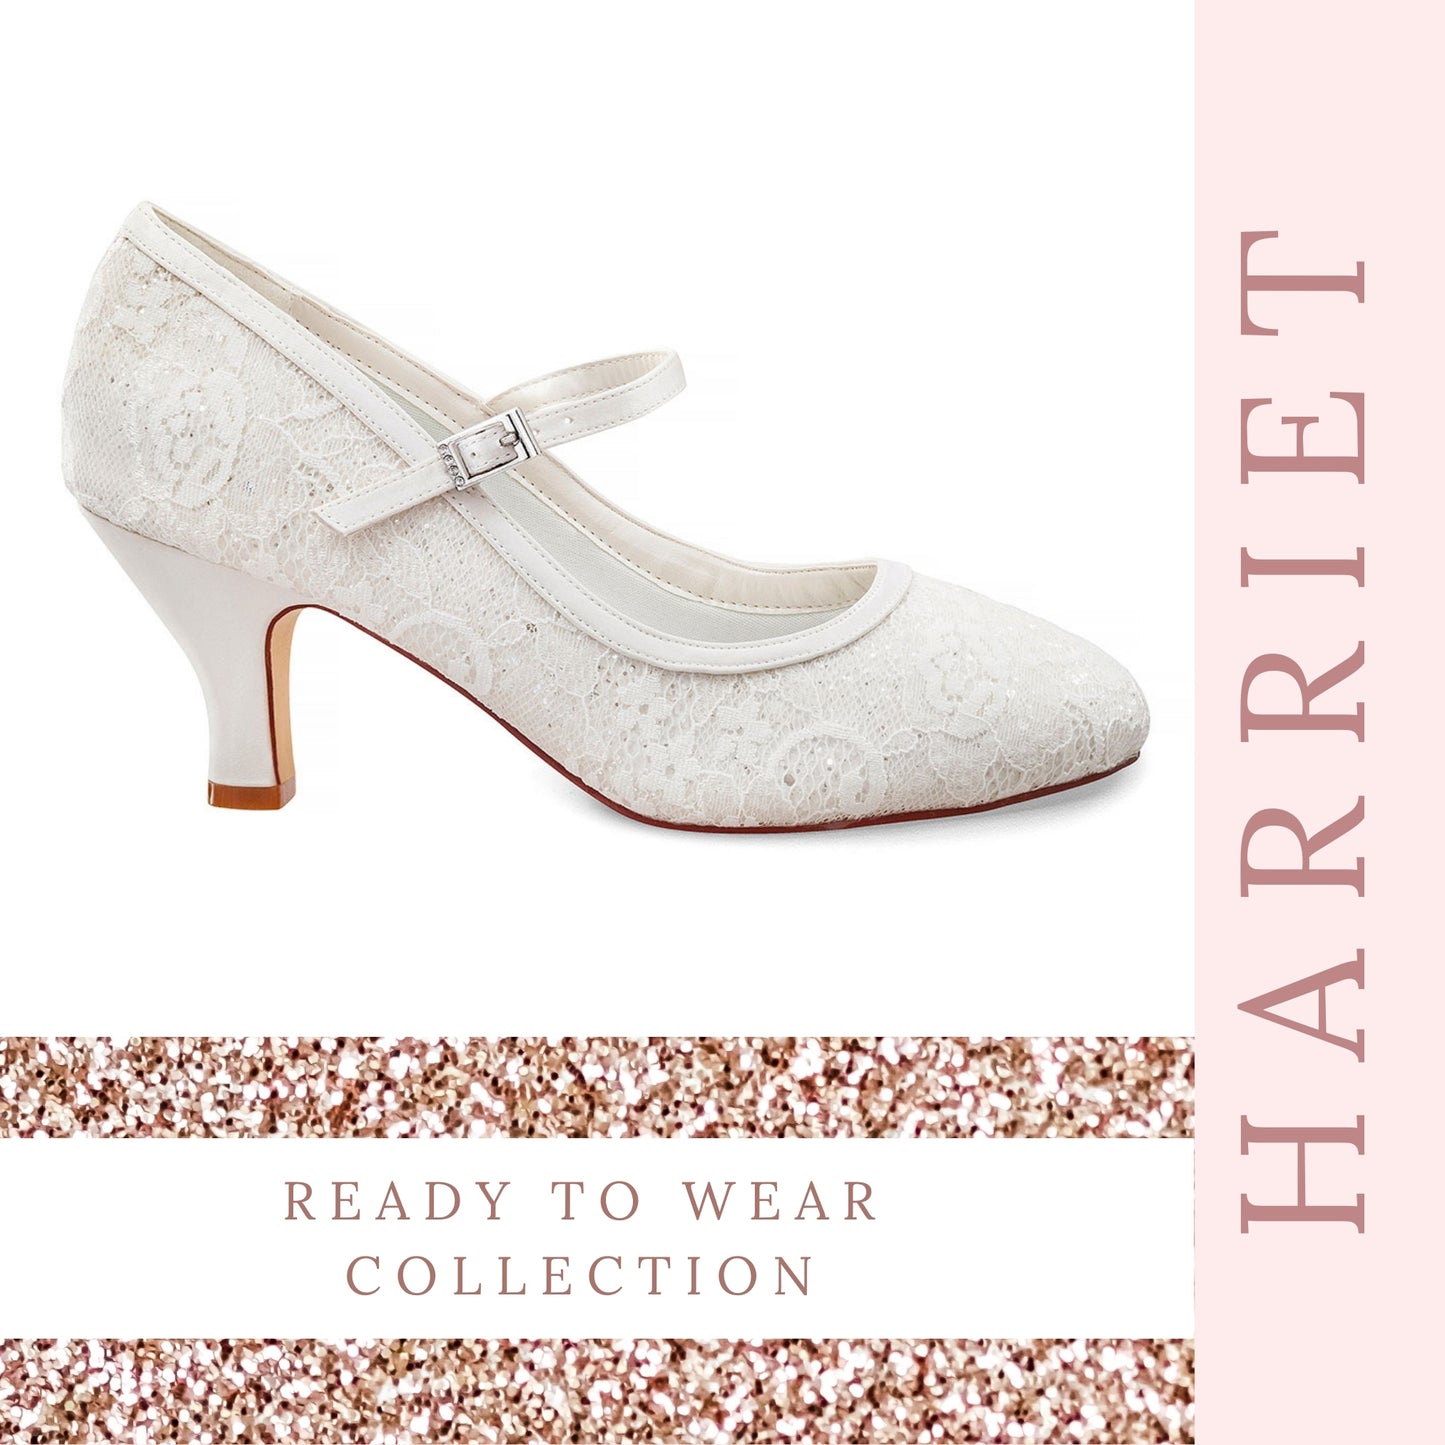 harriet-style-wedding-shoes